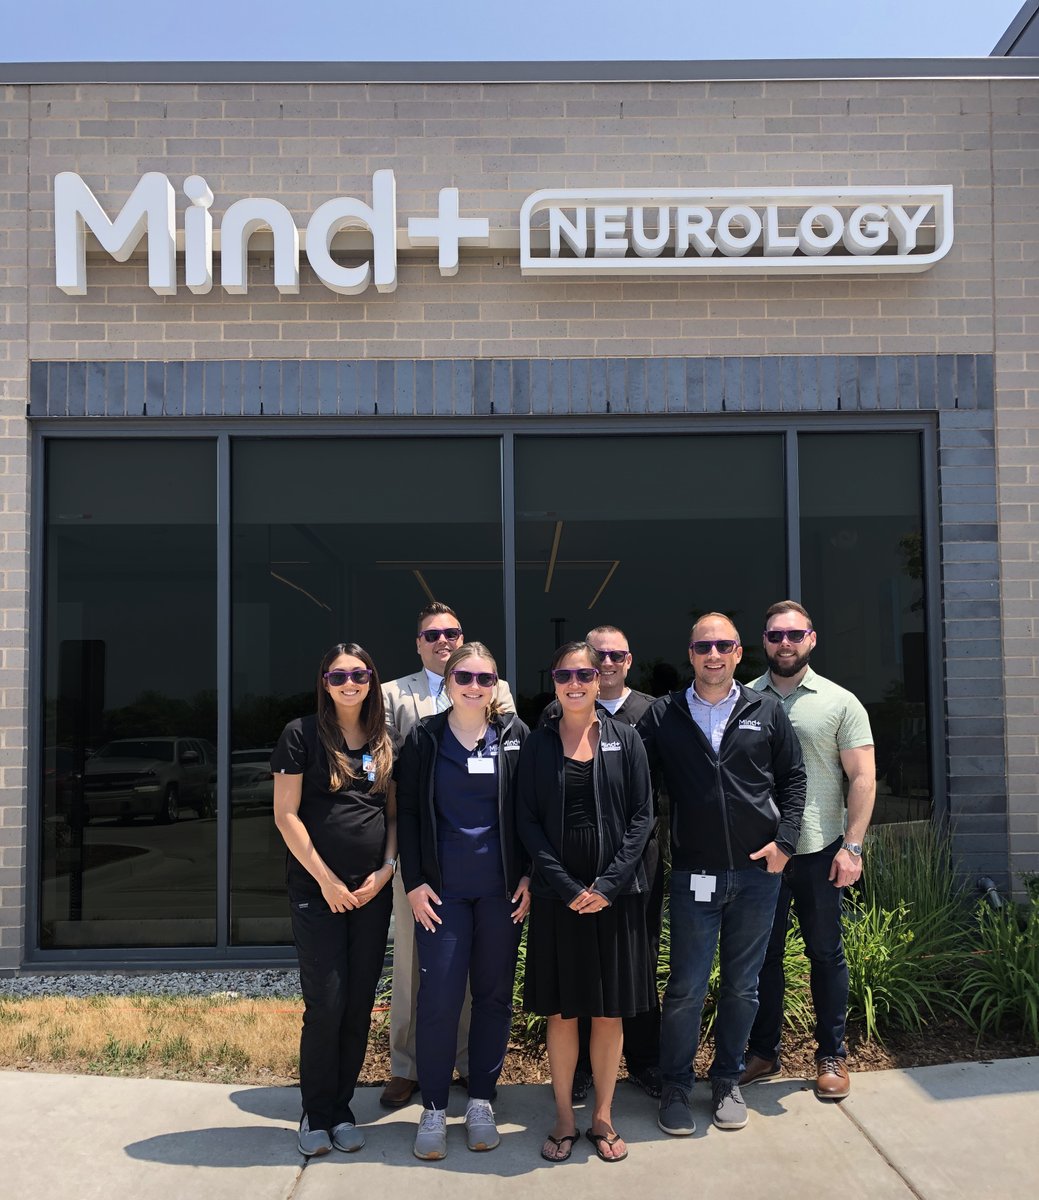 Today is #ShadesForMigraine day! We are spreading awareness for the one billion people that suffer from migraine. Our mission is to end headache and migraine suffering. Together we can make a difference!